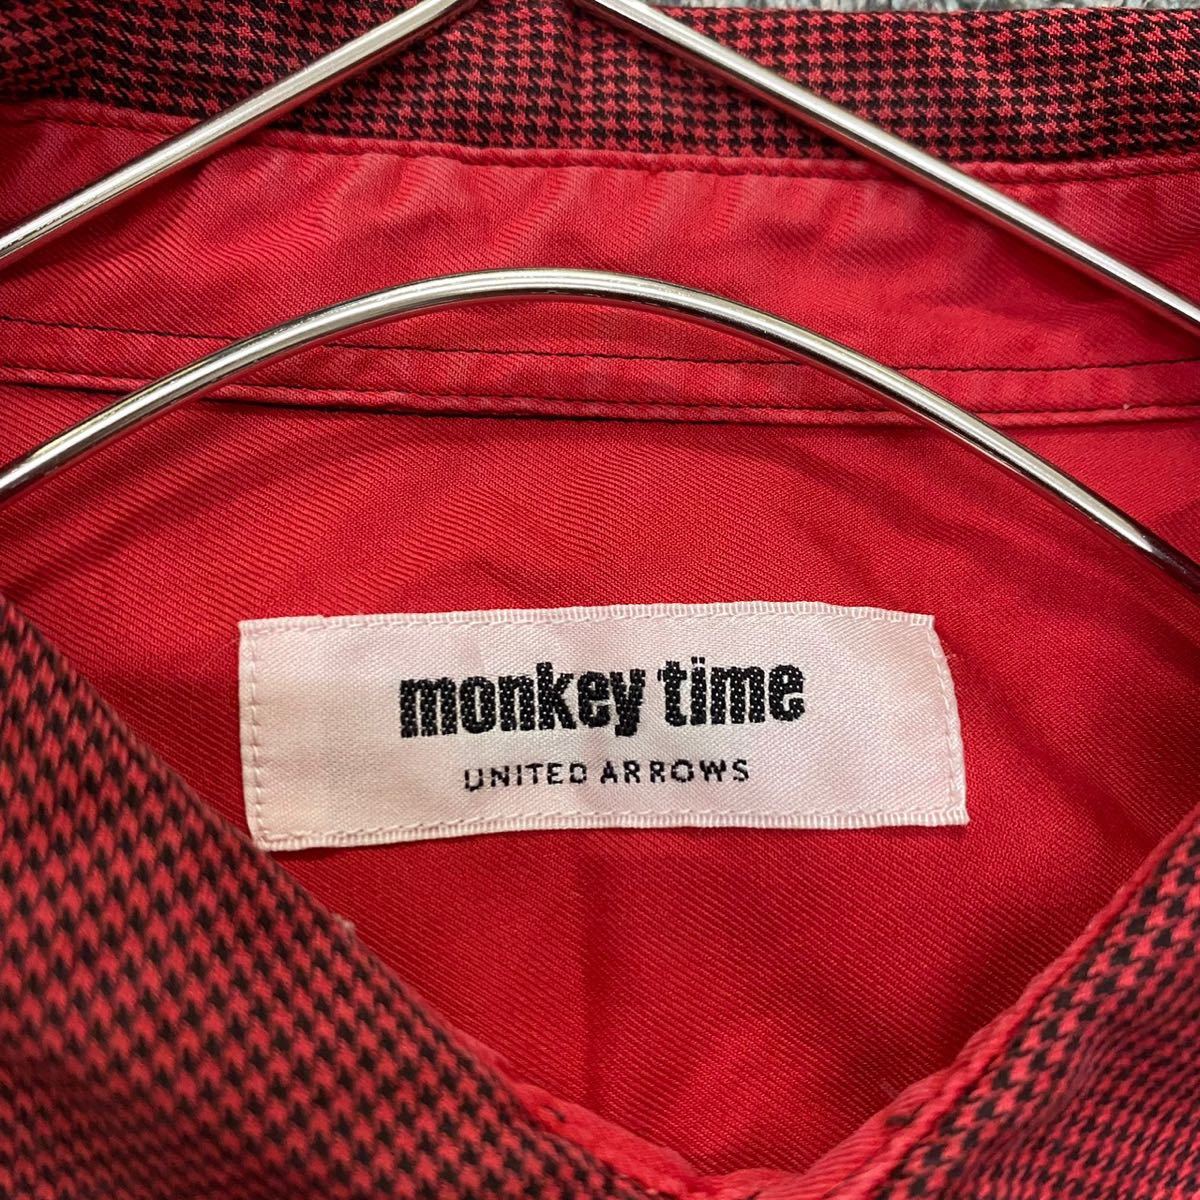 monkey time Monkey time long sleeve shirt thousand bird pattern size S red red men's tops there is no highest bid (N8)